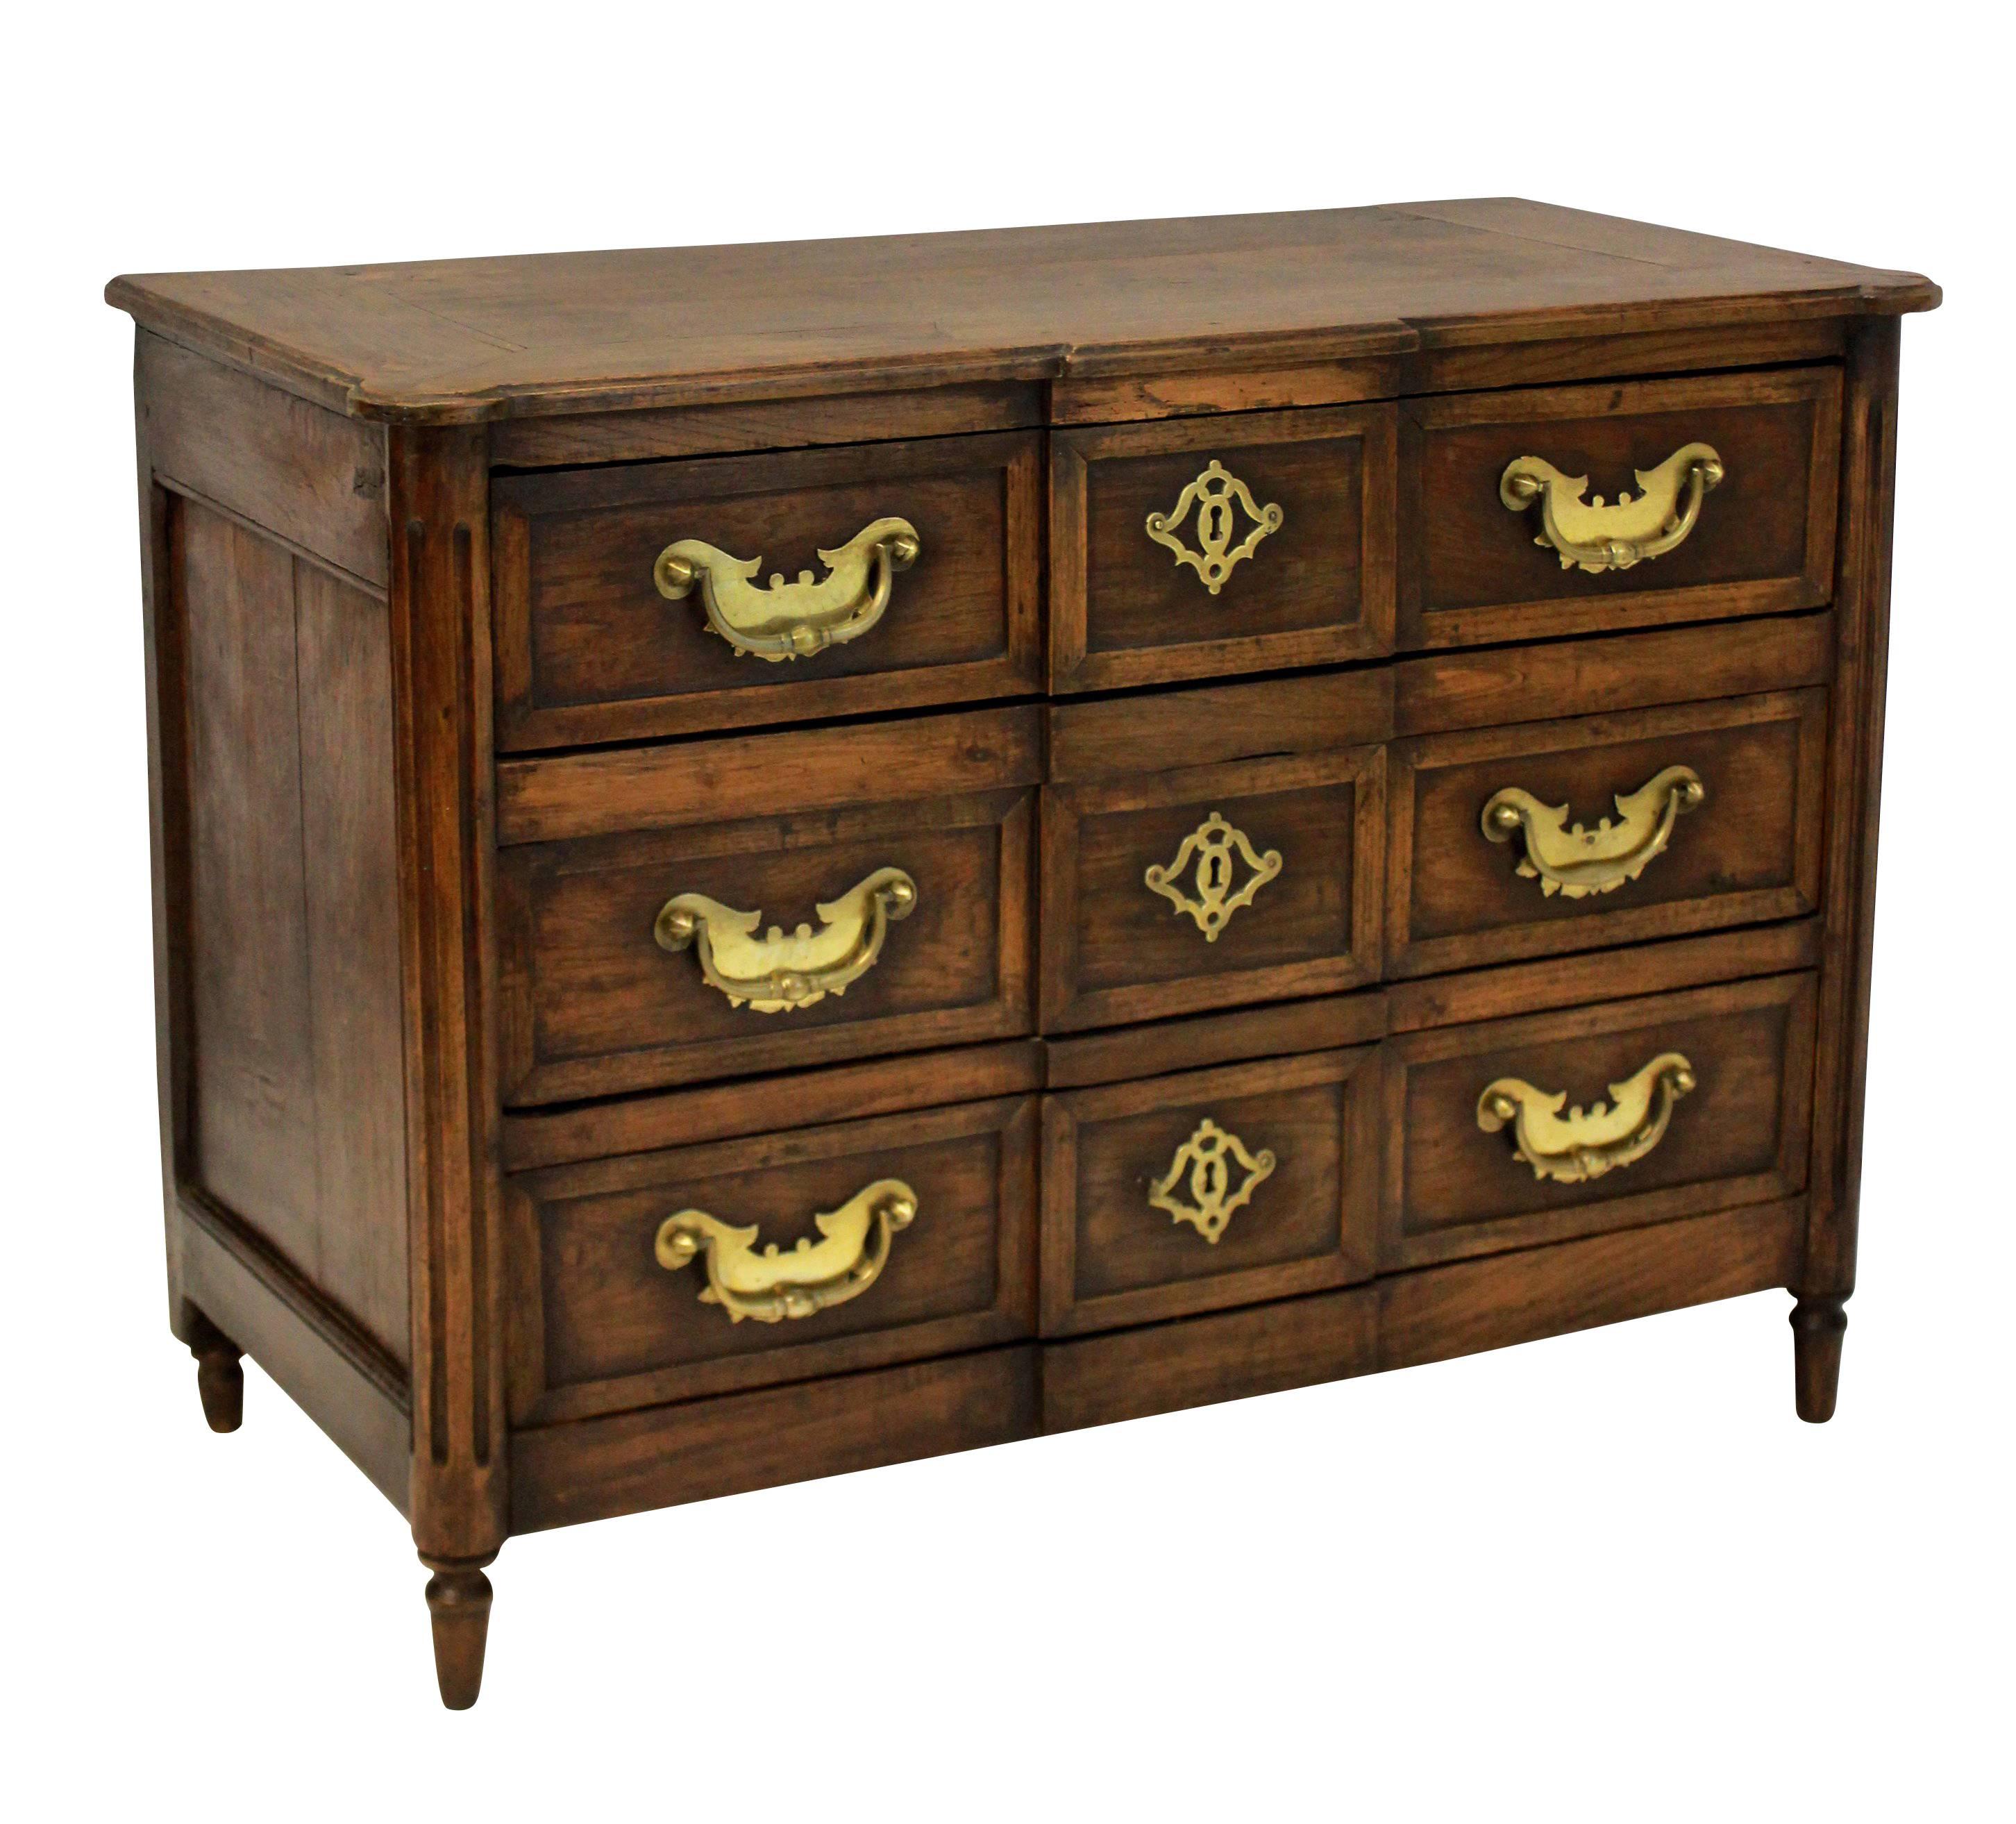 A French Provincial commode in oak, with beautiful brass handles and escutcheons.

